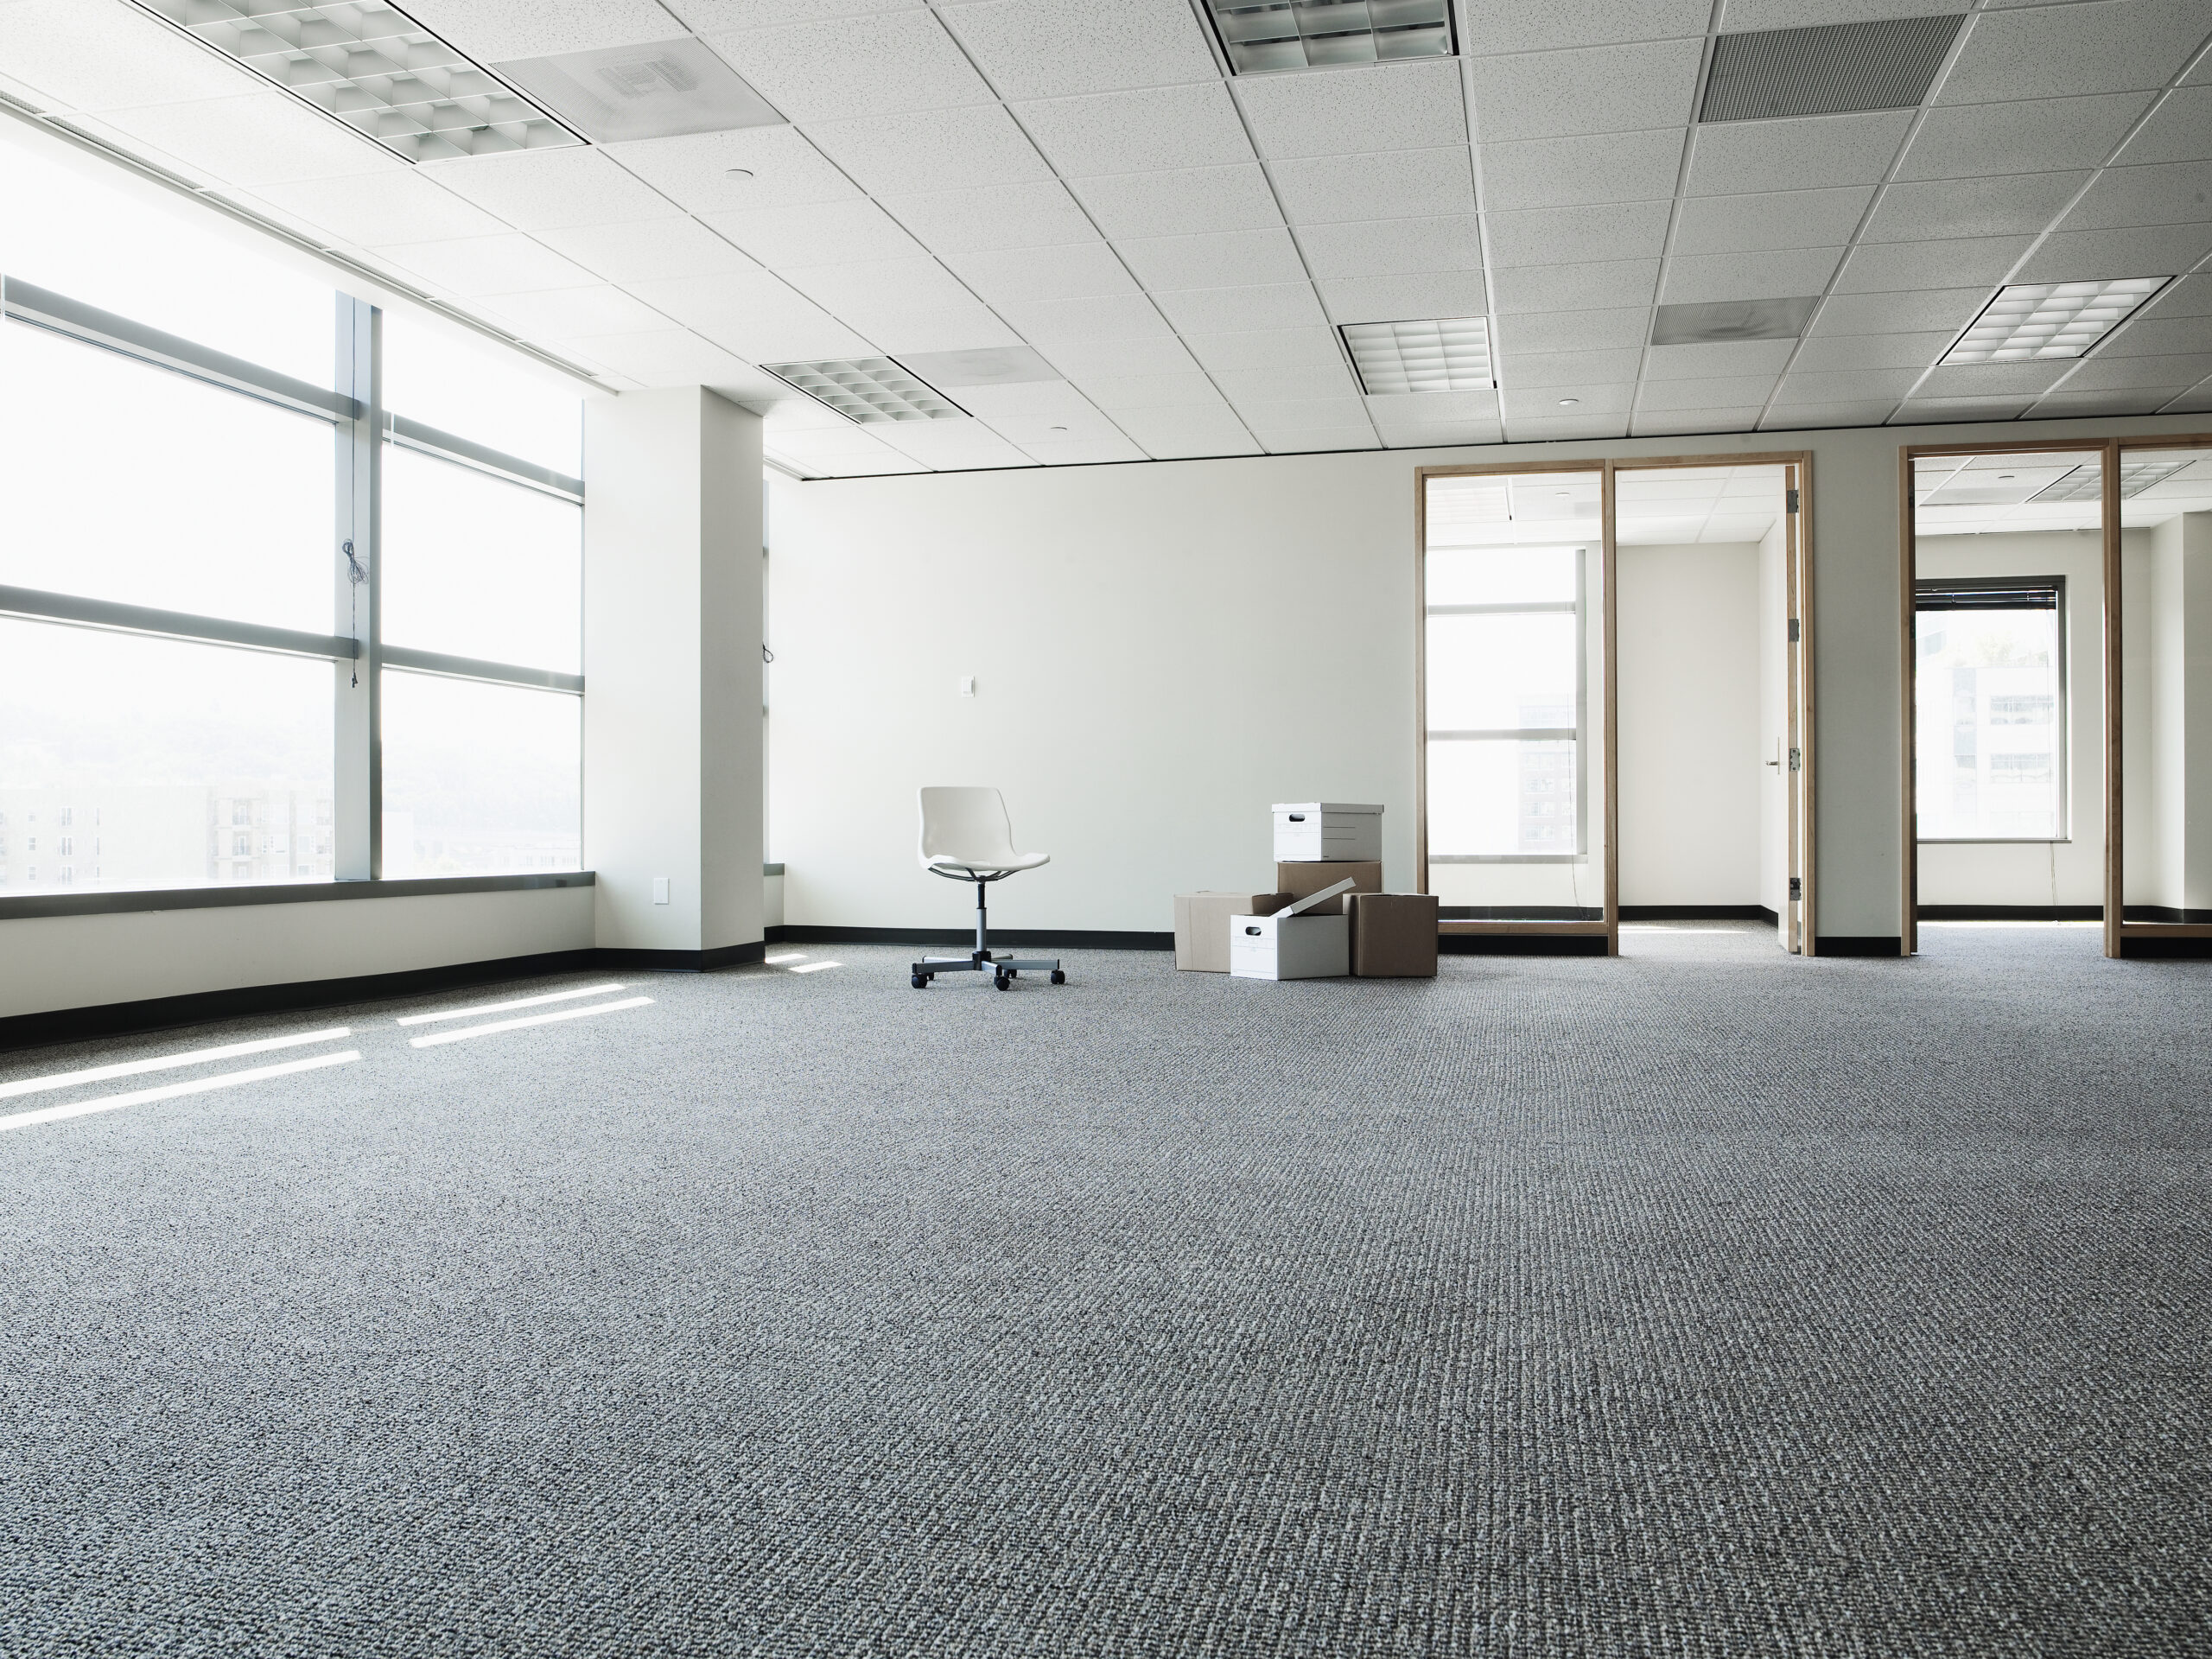 Could vacant office spaces across the U.S. be the solution to a national problem?